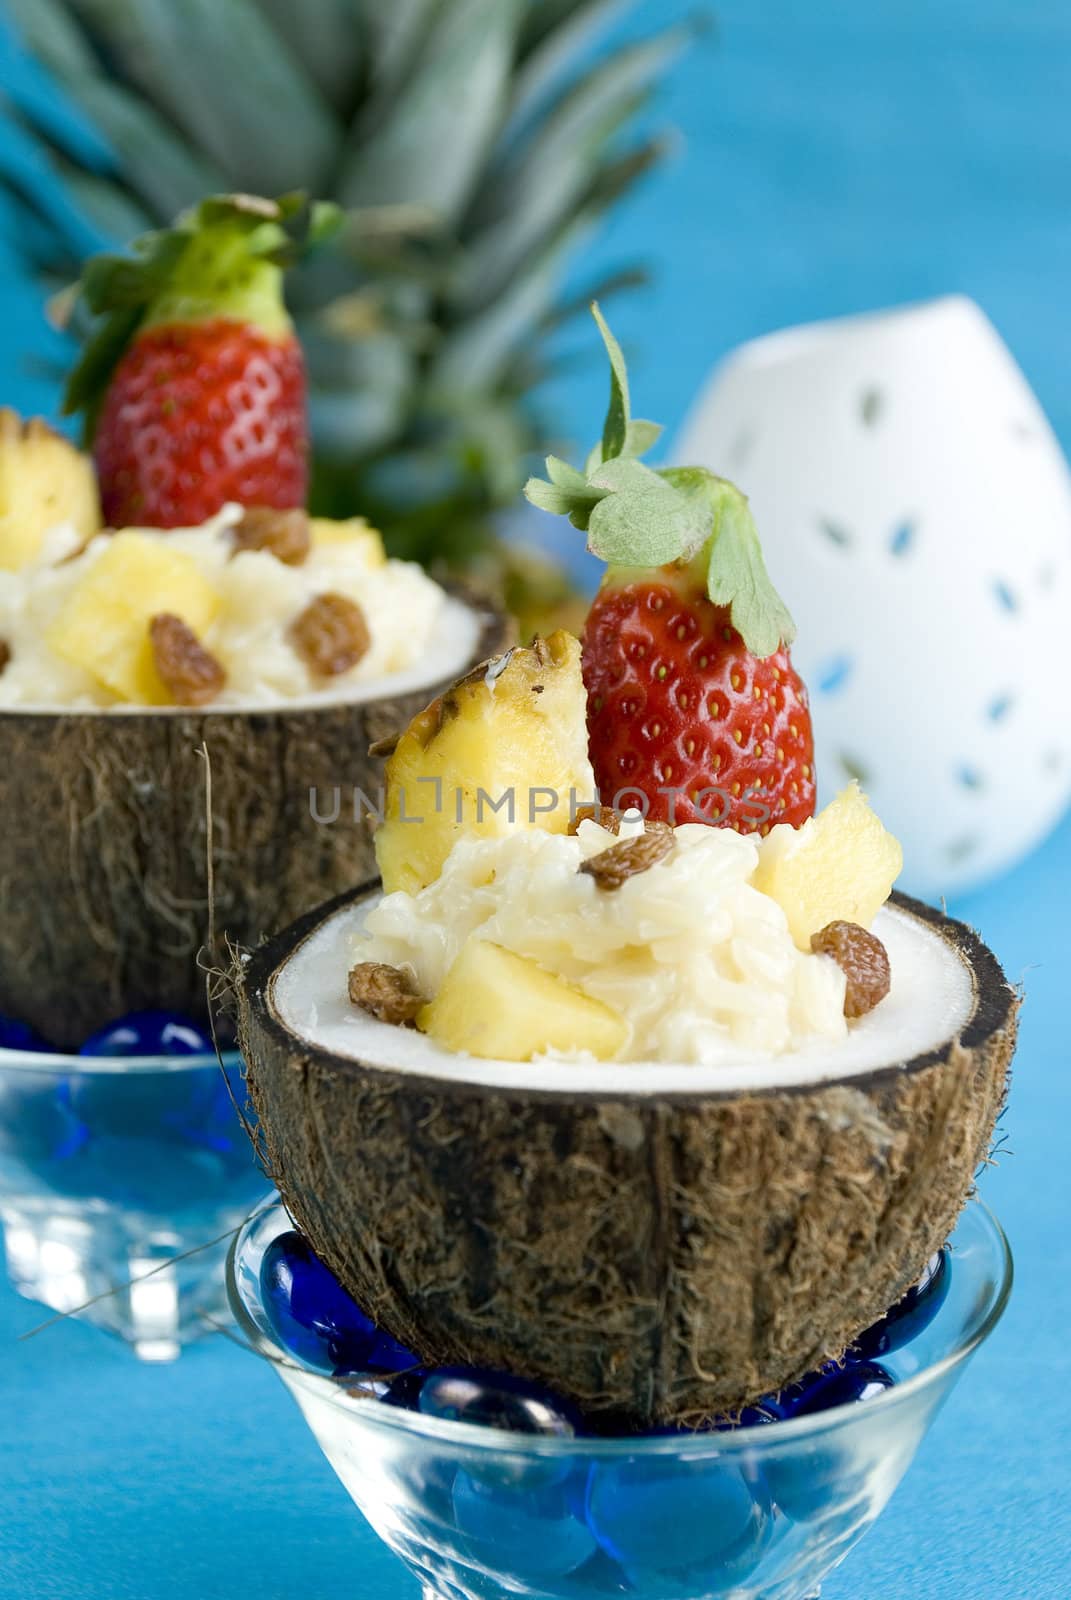 Coconut rice pudding with pineapple and strawberries